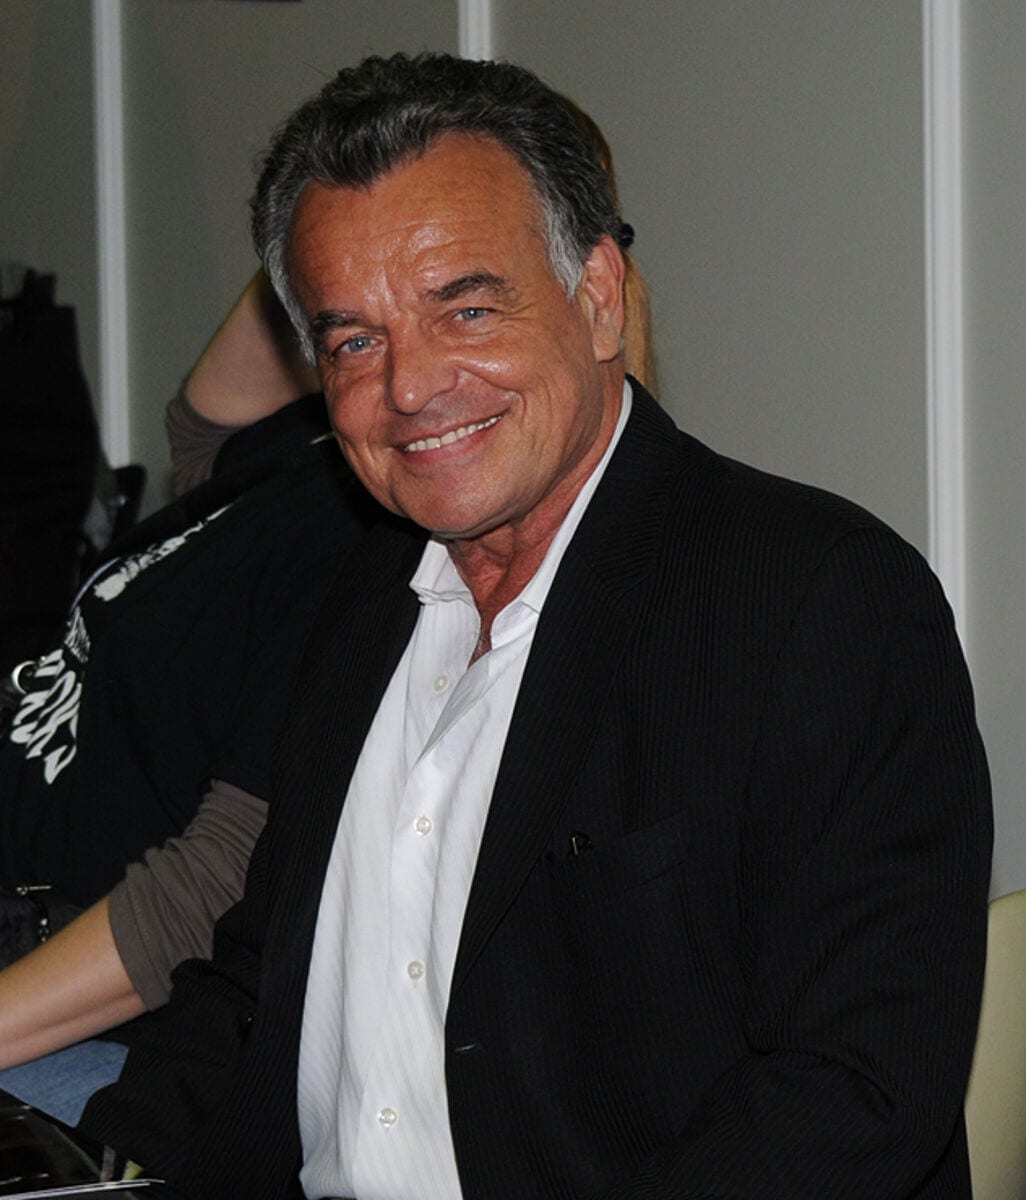 Ray Wise - Famous Voice Actor